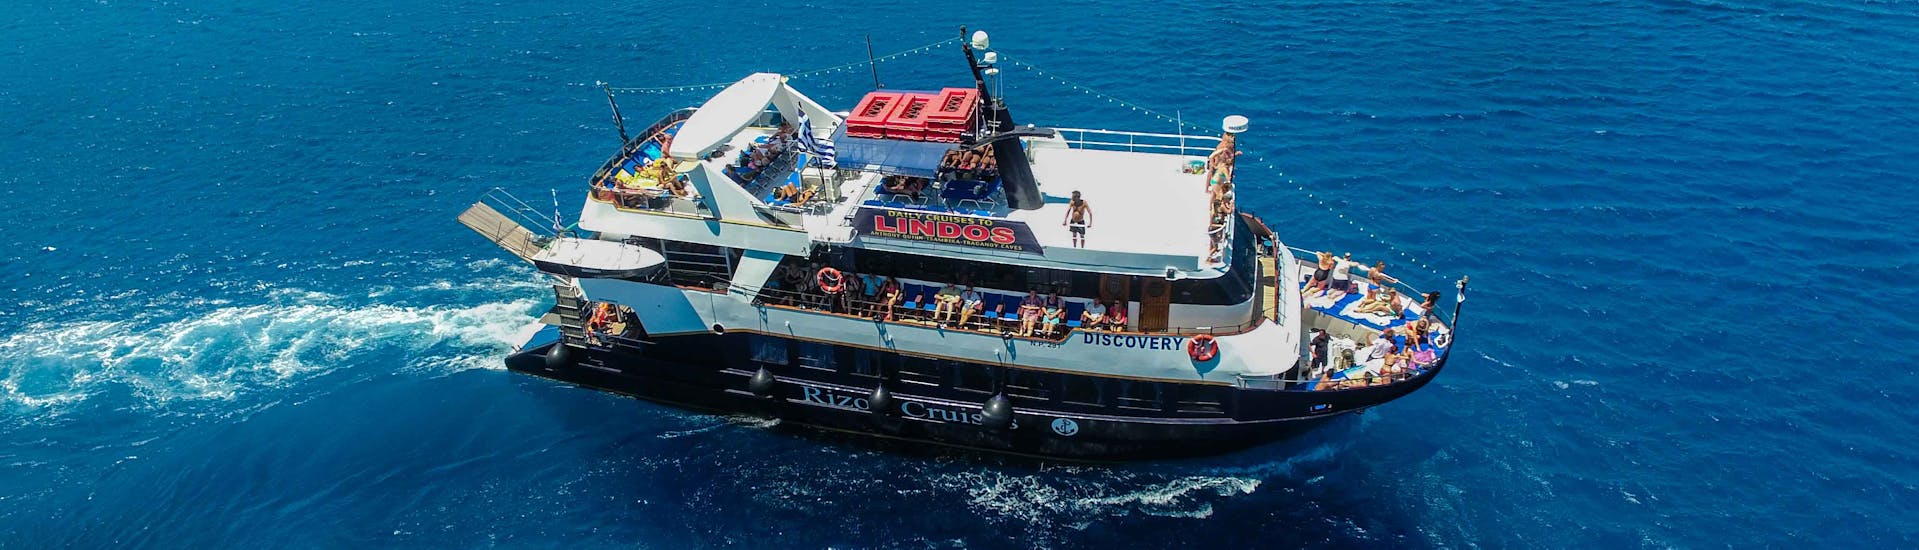 The boat "Discovery" navigates on the Mediterranean Sea during the Full-Day Boat Trip to Symi Island with Swimming with Rizos Cruises Rhodes.